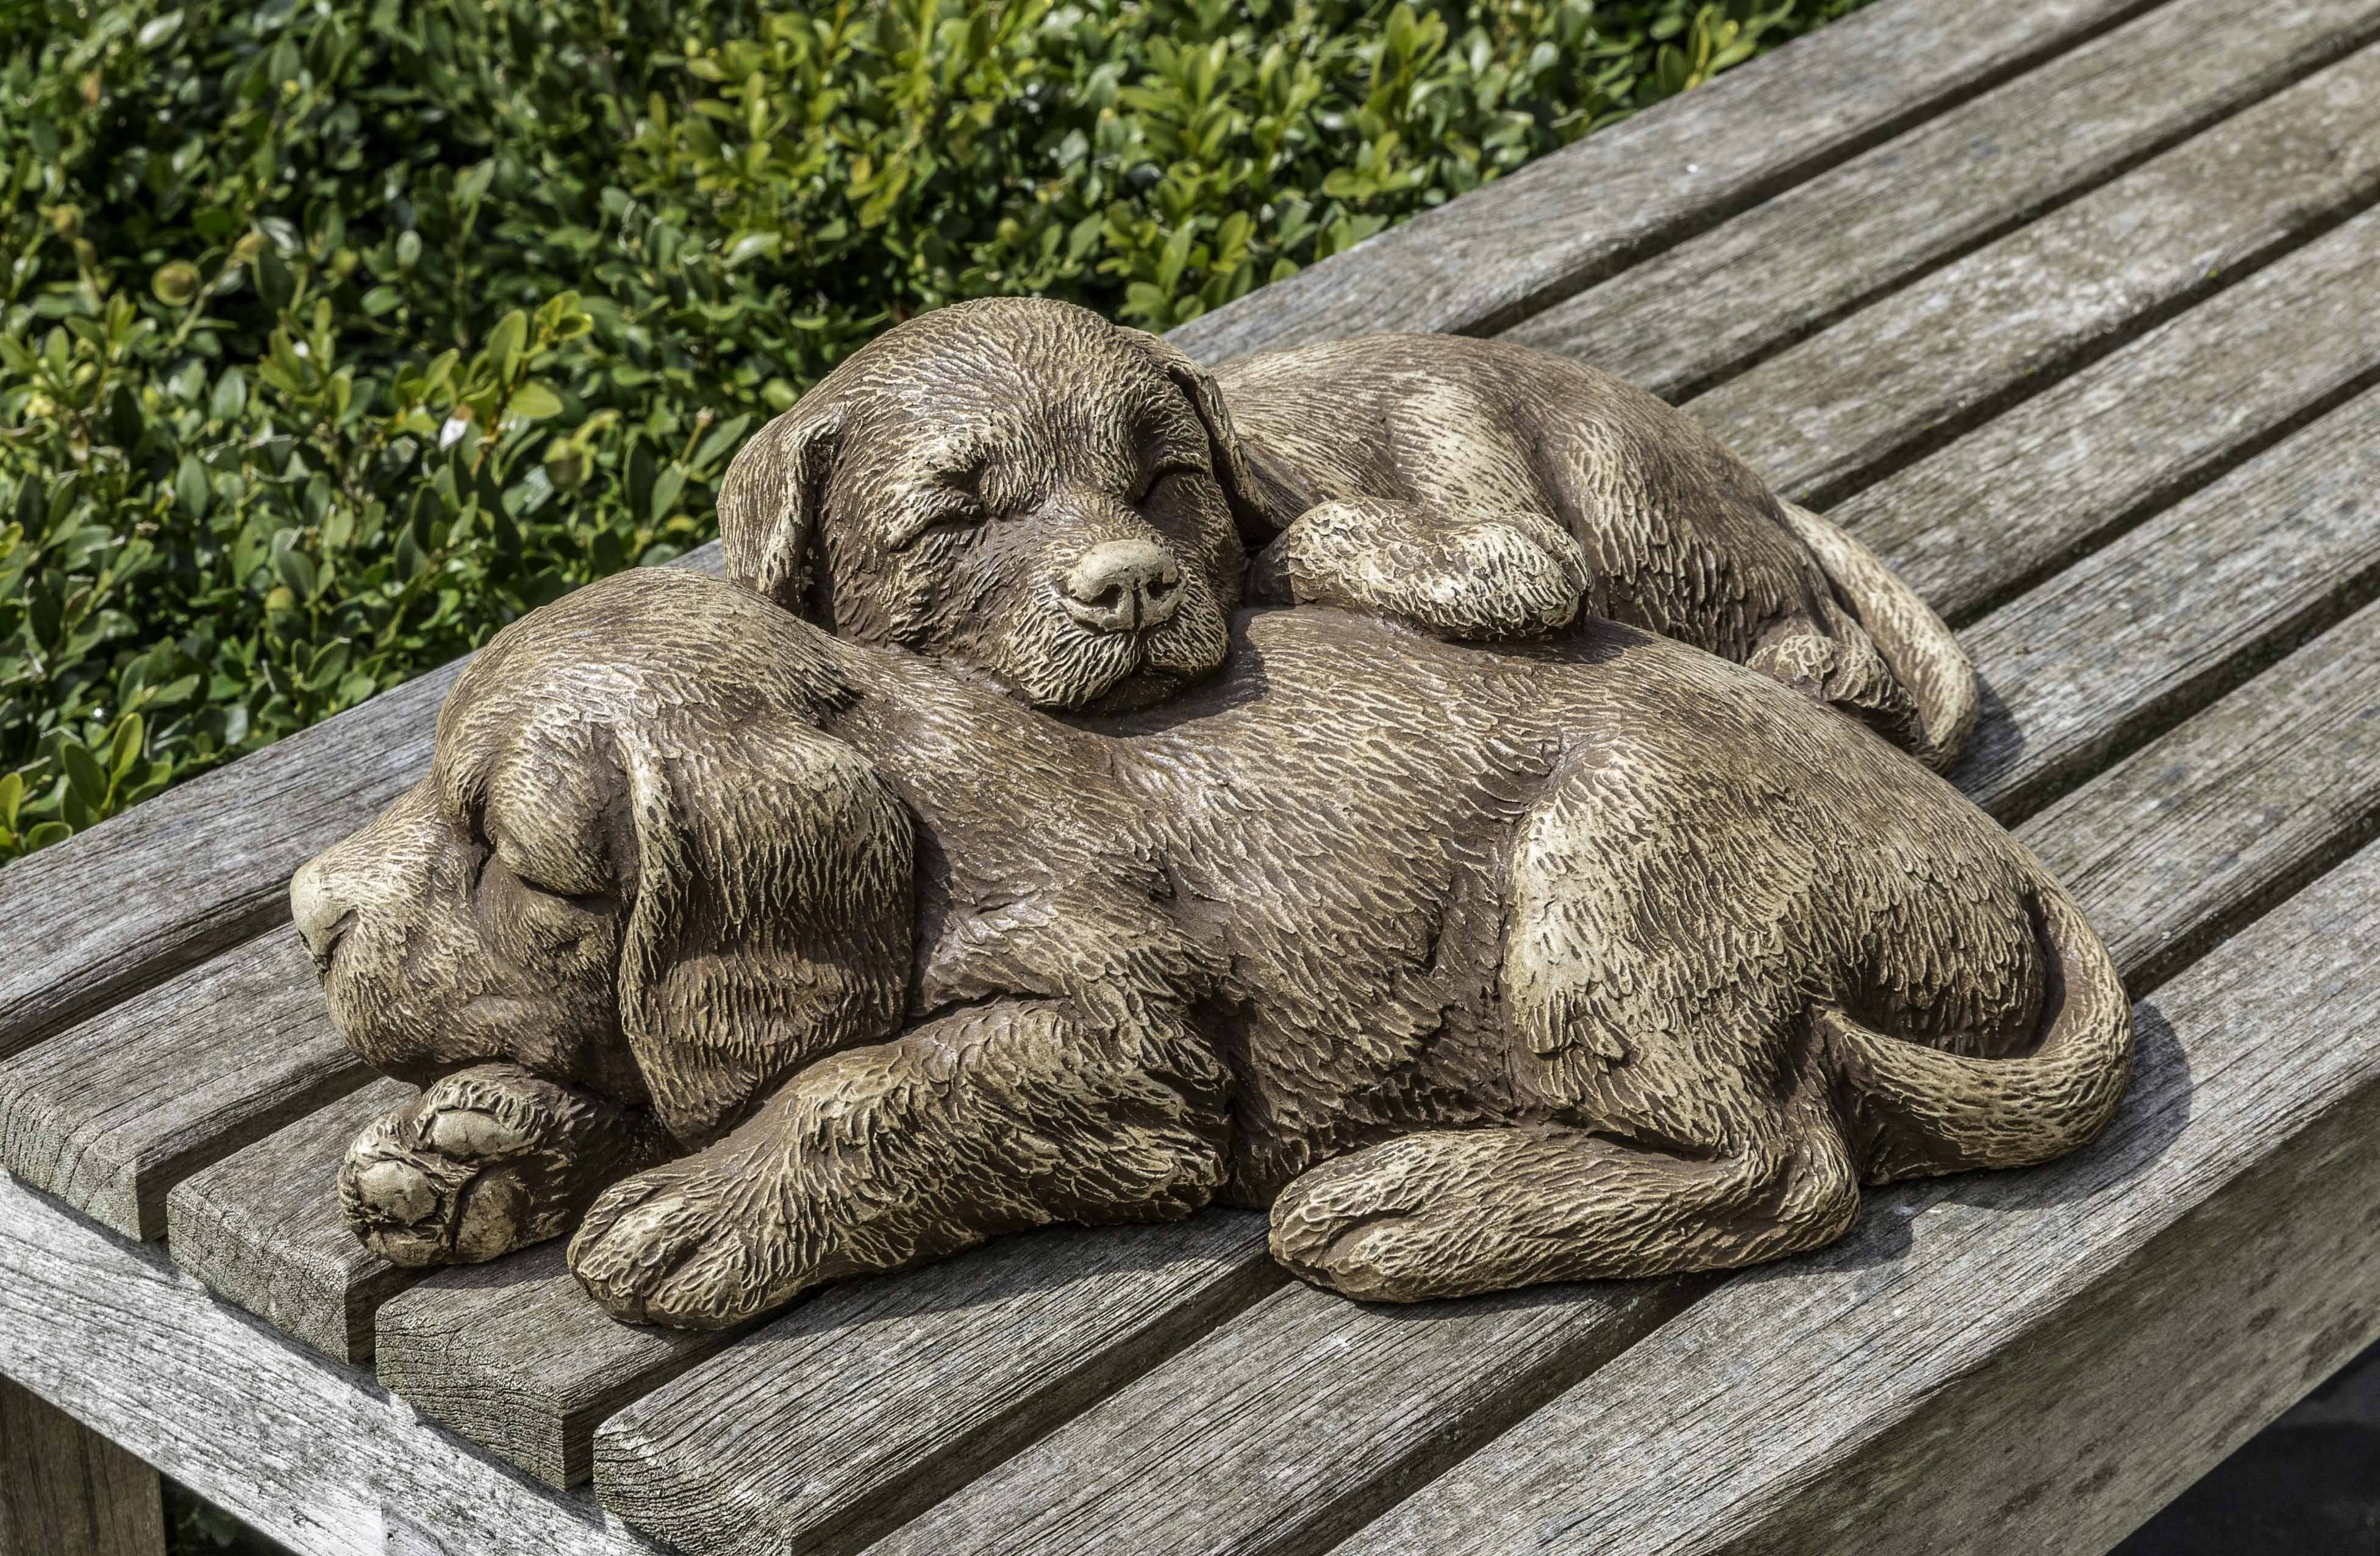 Photo of Campania Nap Time Puppies - Marquis Gardens